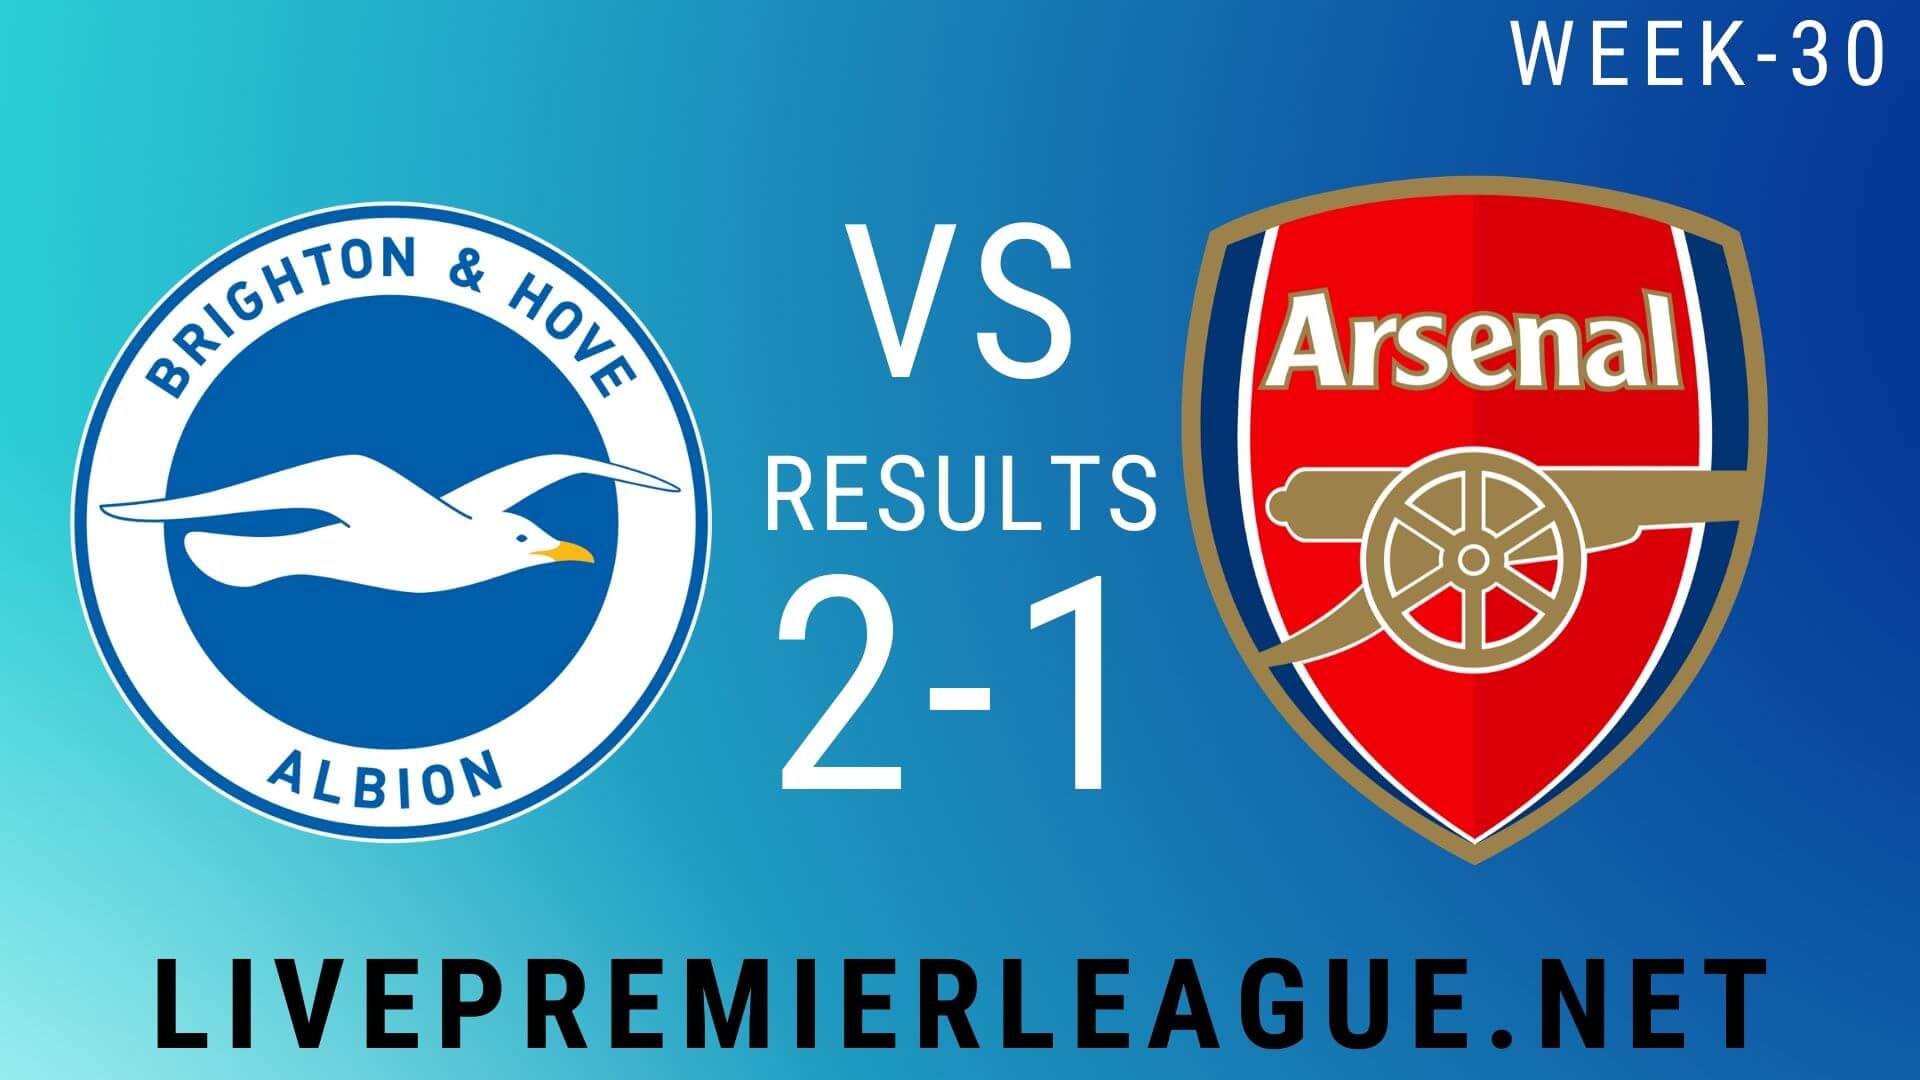 Brighton and Hove Albion Vs Arsenal | Week 30 Result 2020